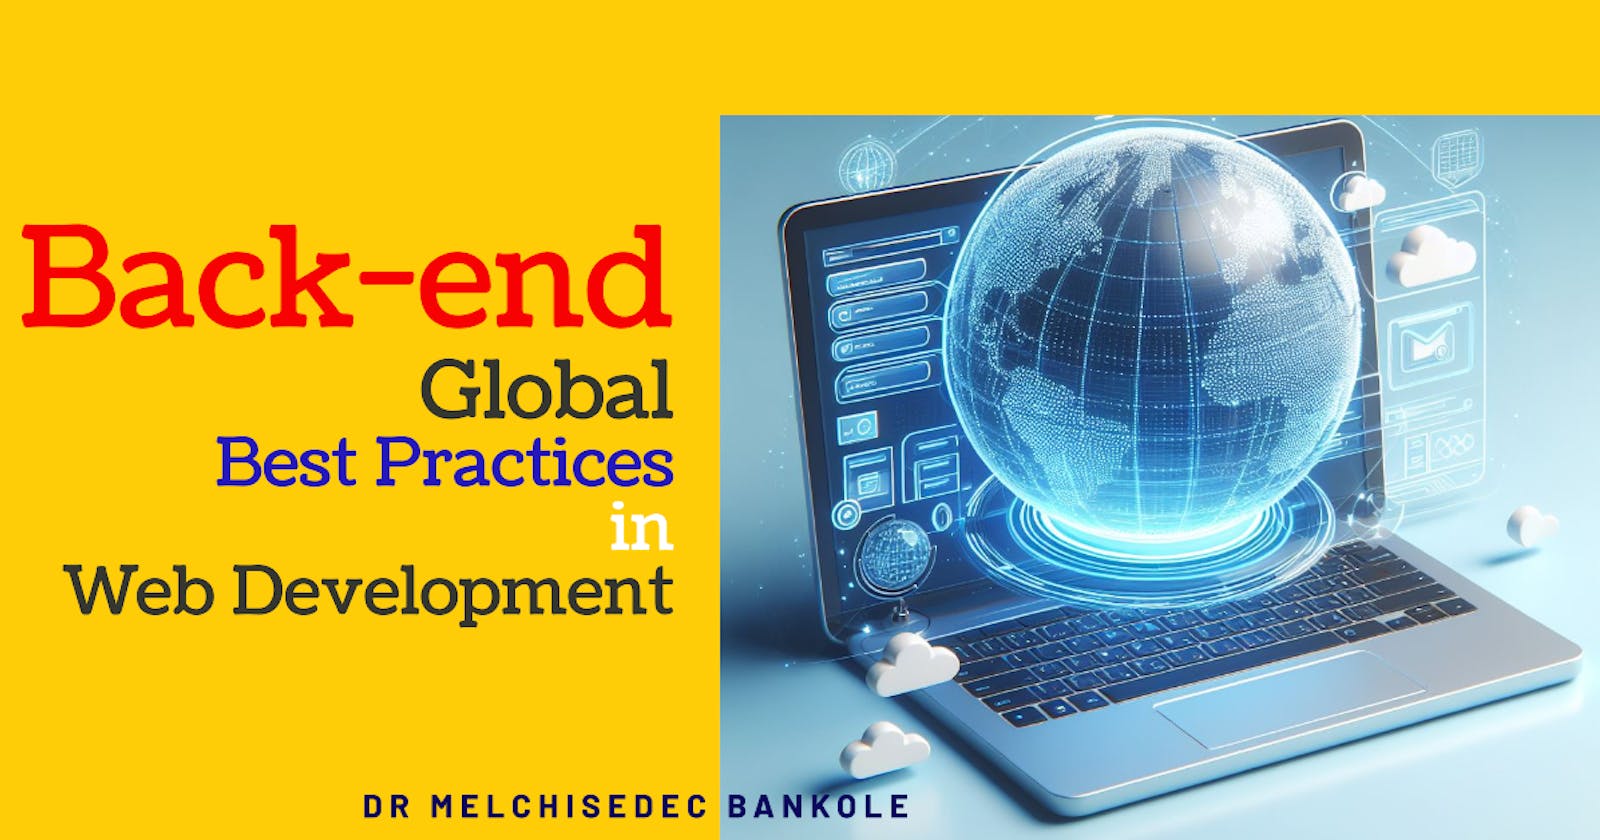 Backend Global Best Practices for Web Development